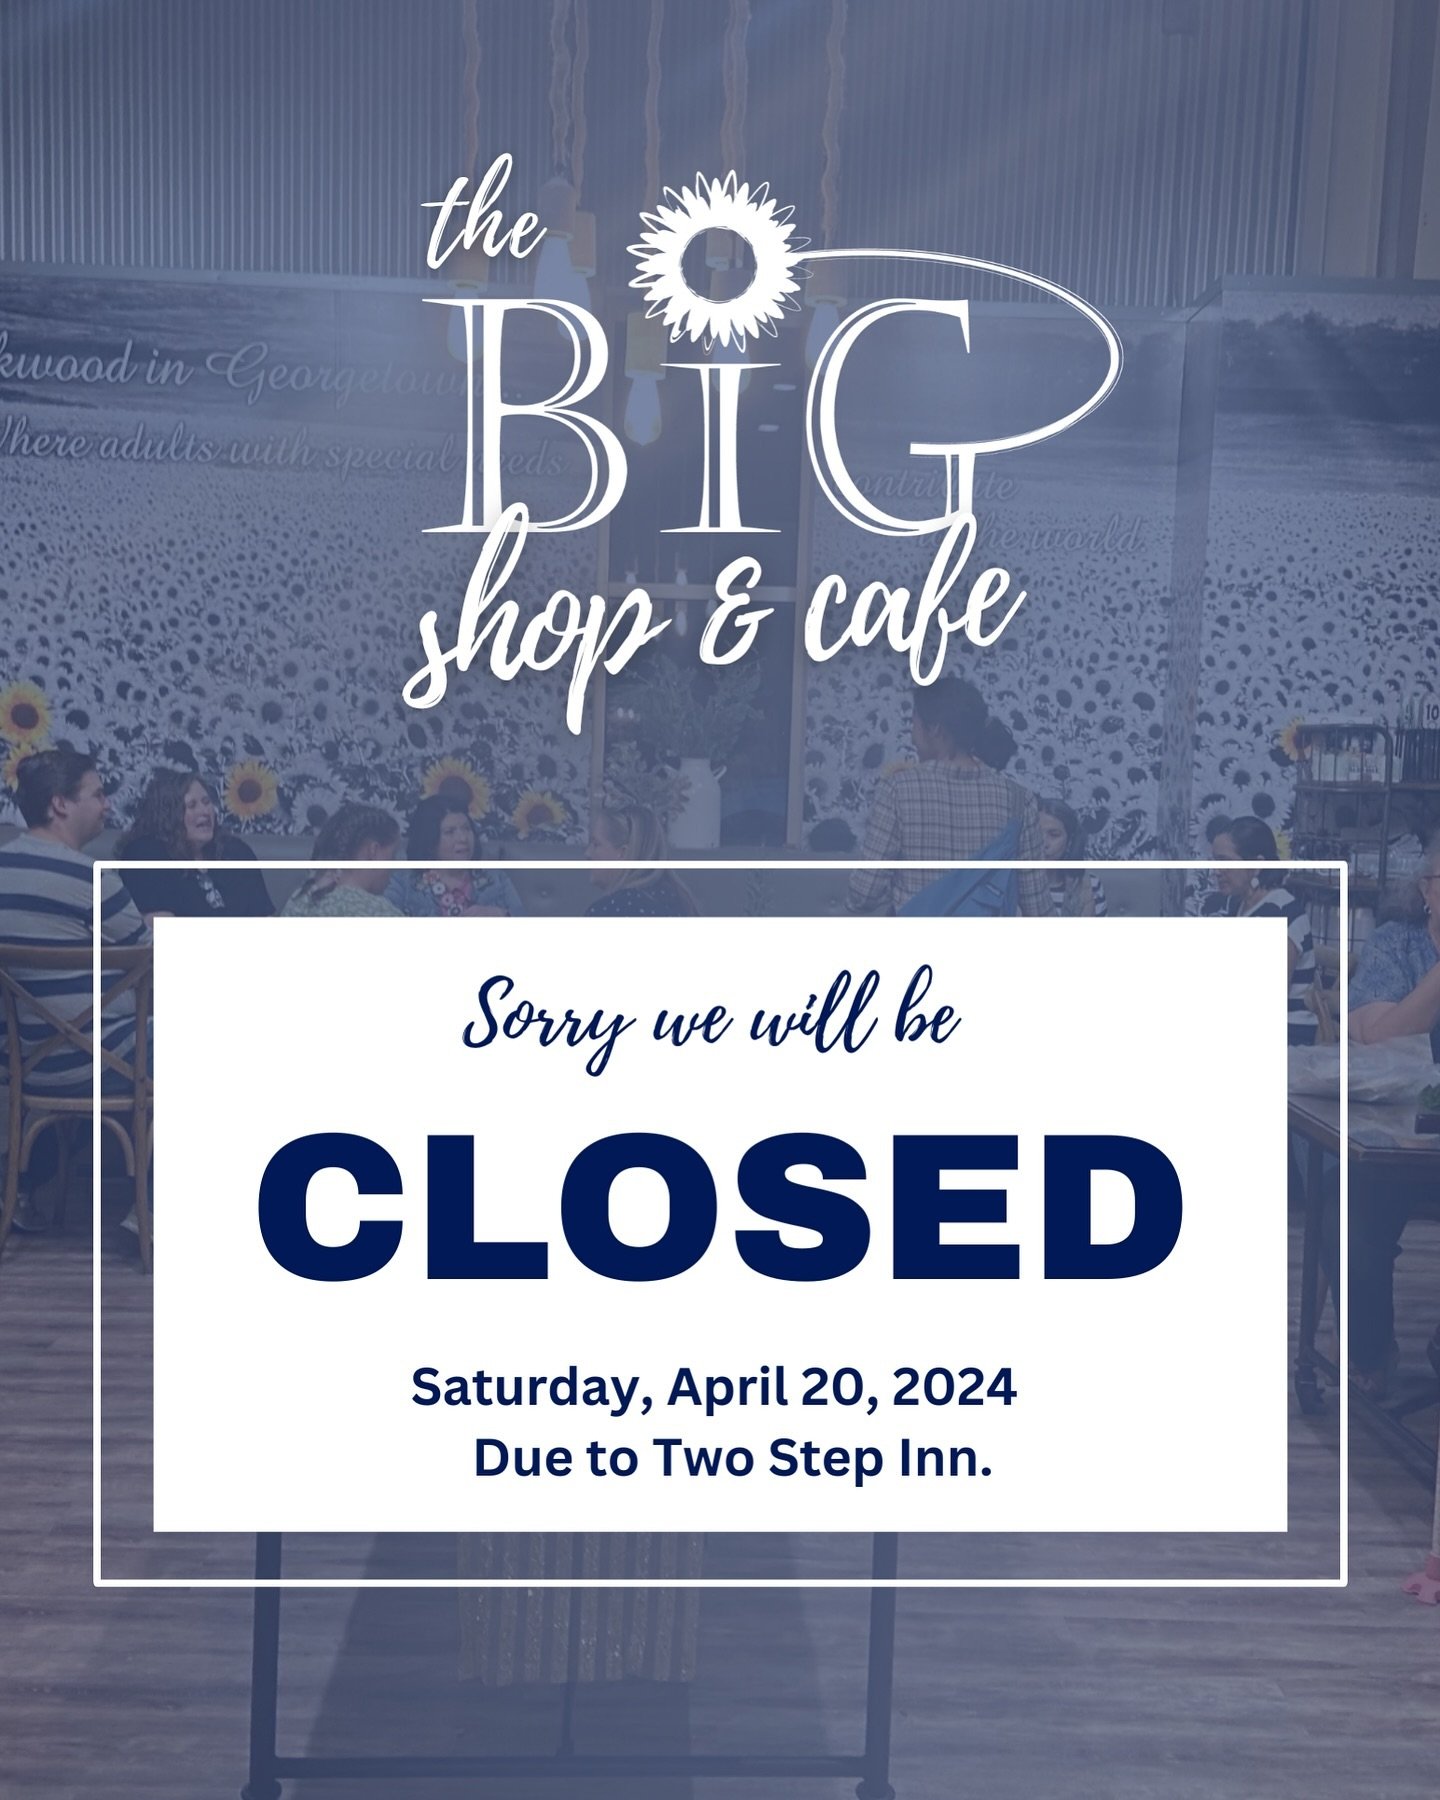 Heads up, everyone! 🌟&nbsp;
The BiG Shop &amp; Cafe will be closed this Saturday, April 20th, 2024, due to Two Step Inn! We&rsquo;ll be back to normal hours on Monday, April 22nd. See you then! ✨ #TwoStepInn #SeeYouMonday&rdquo; #TheBiGShopandCafe #